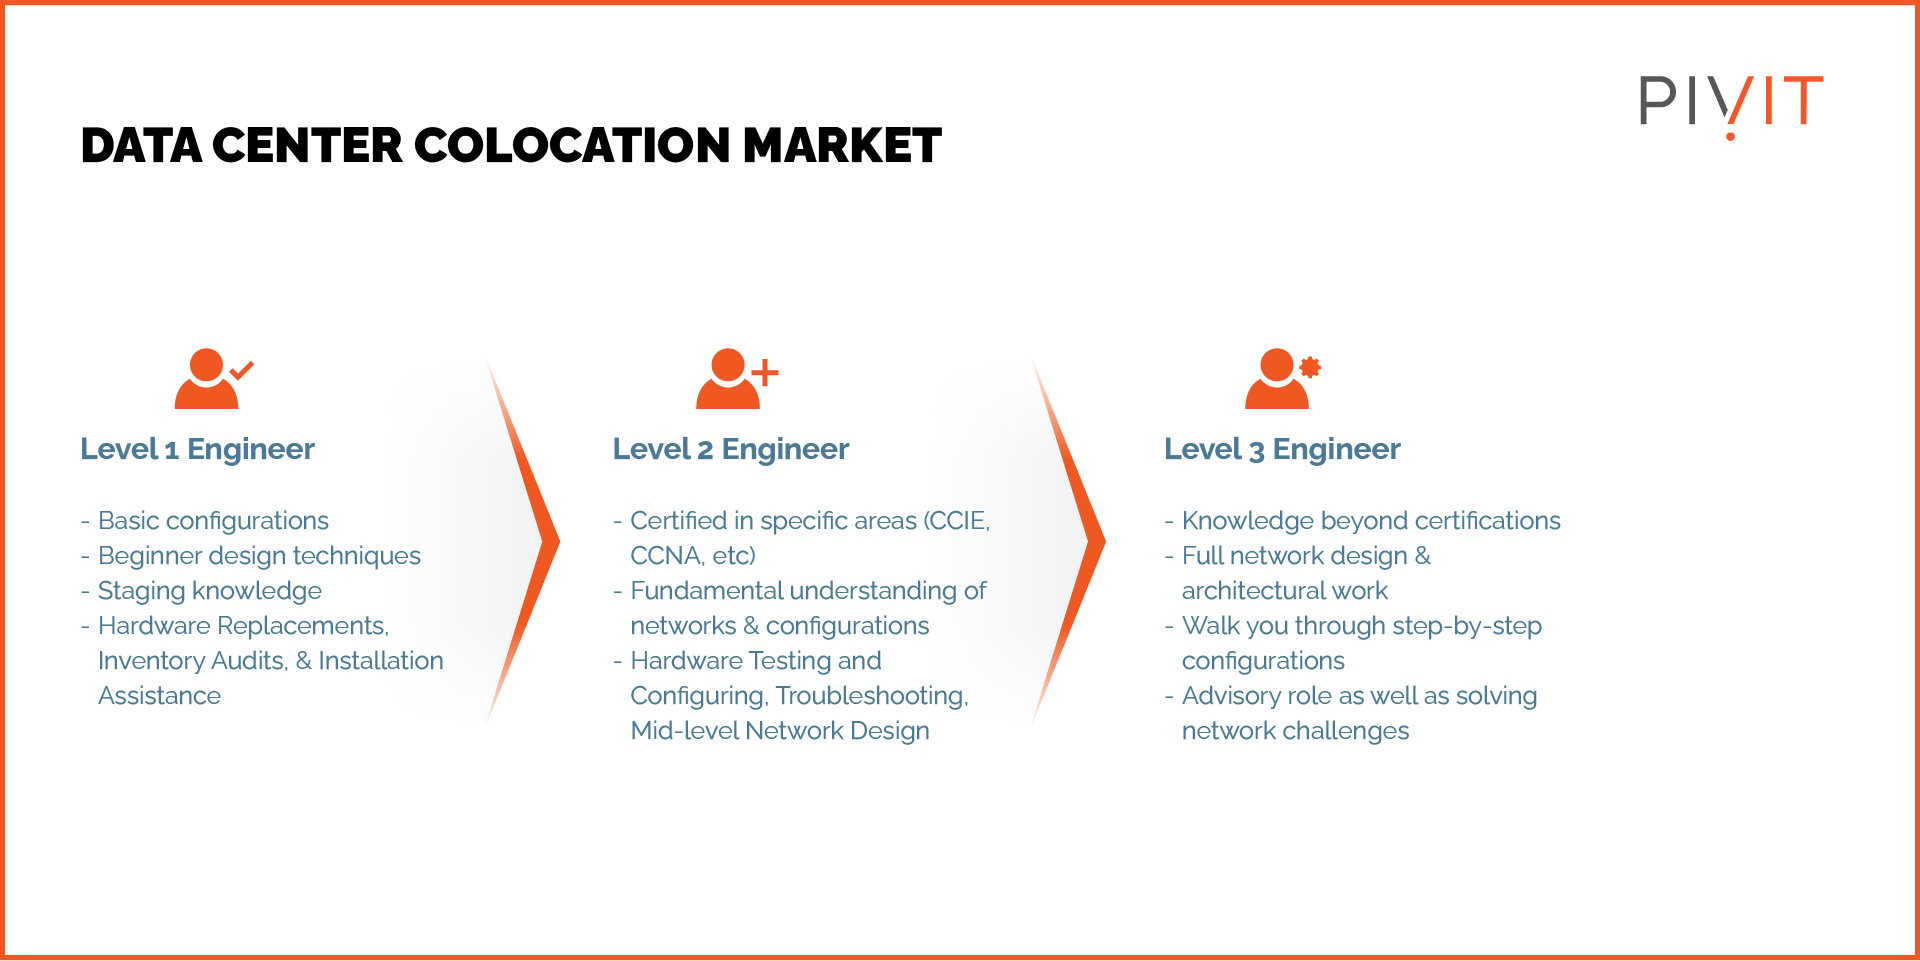 Data center colocation market level 1, 2, and 3 engineers